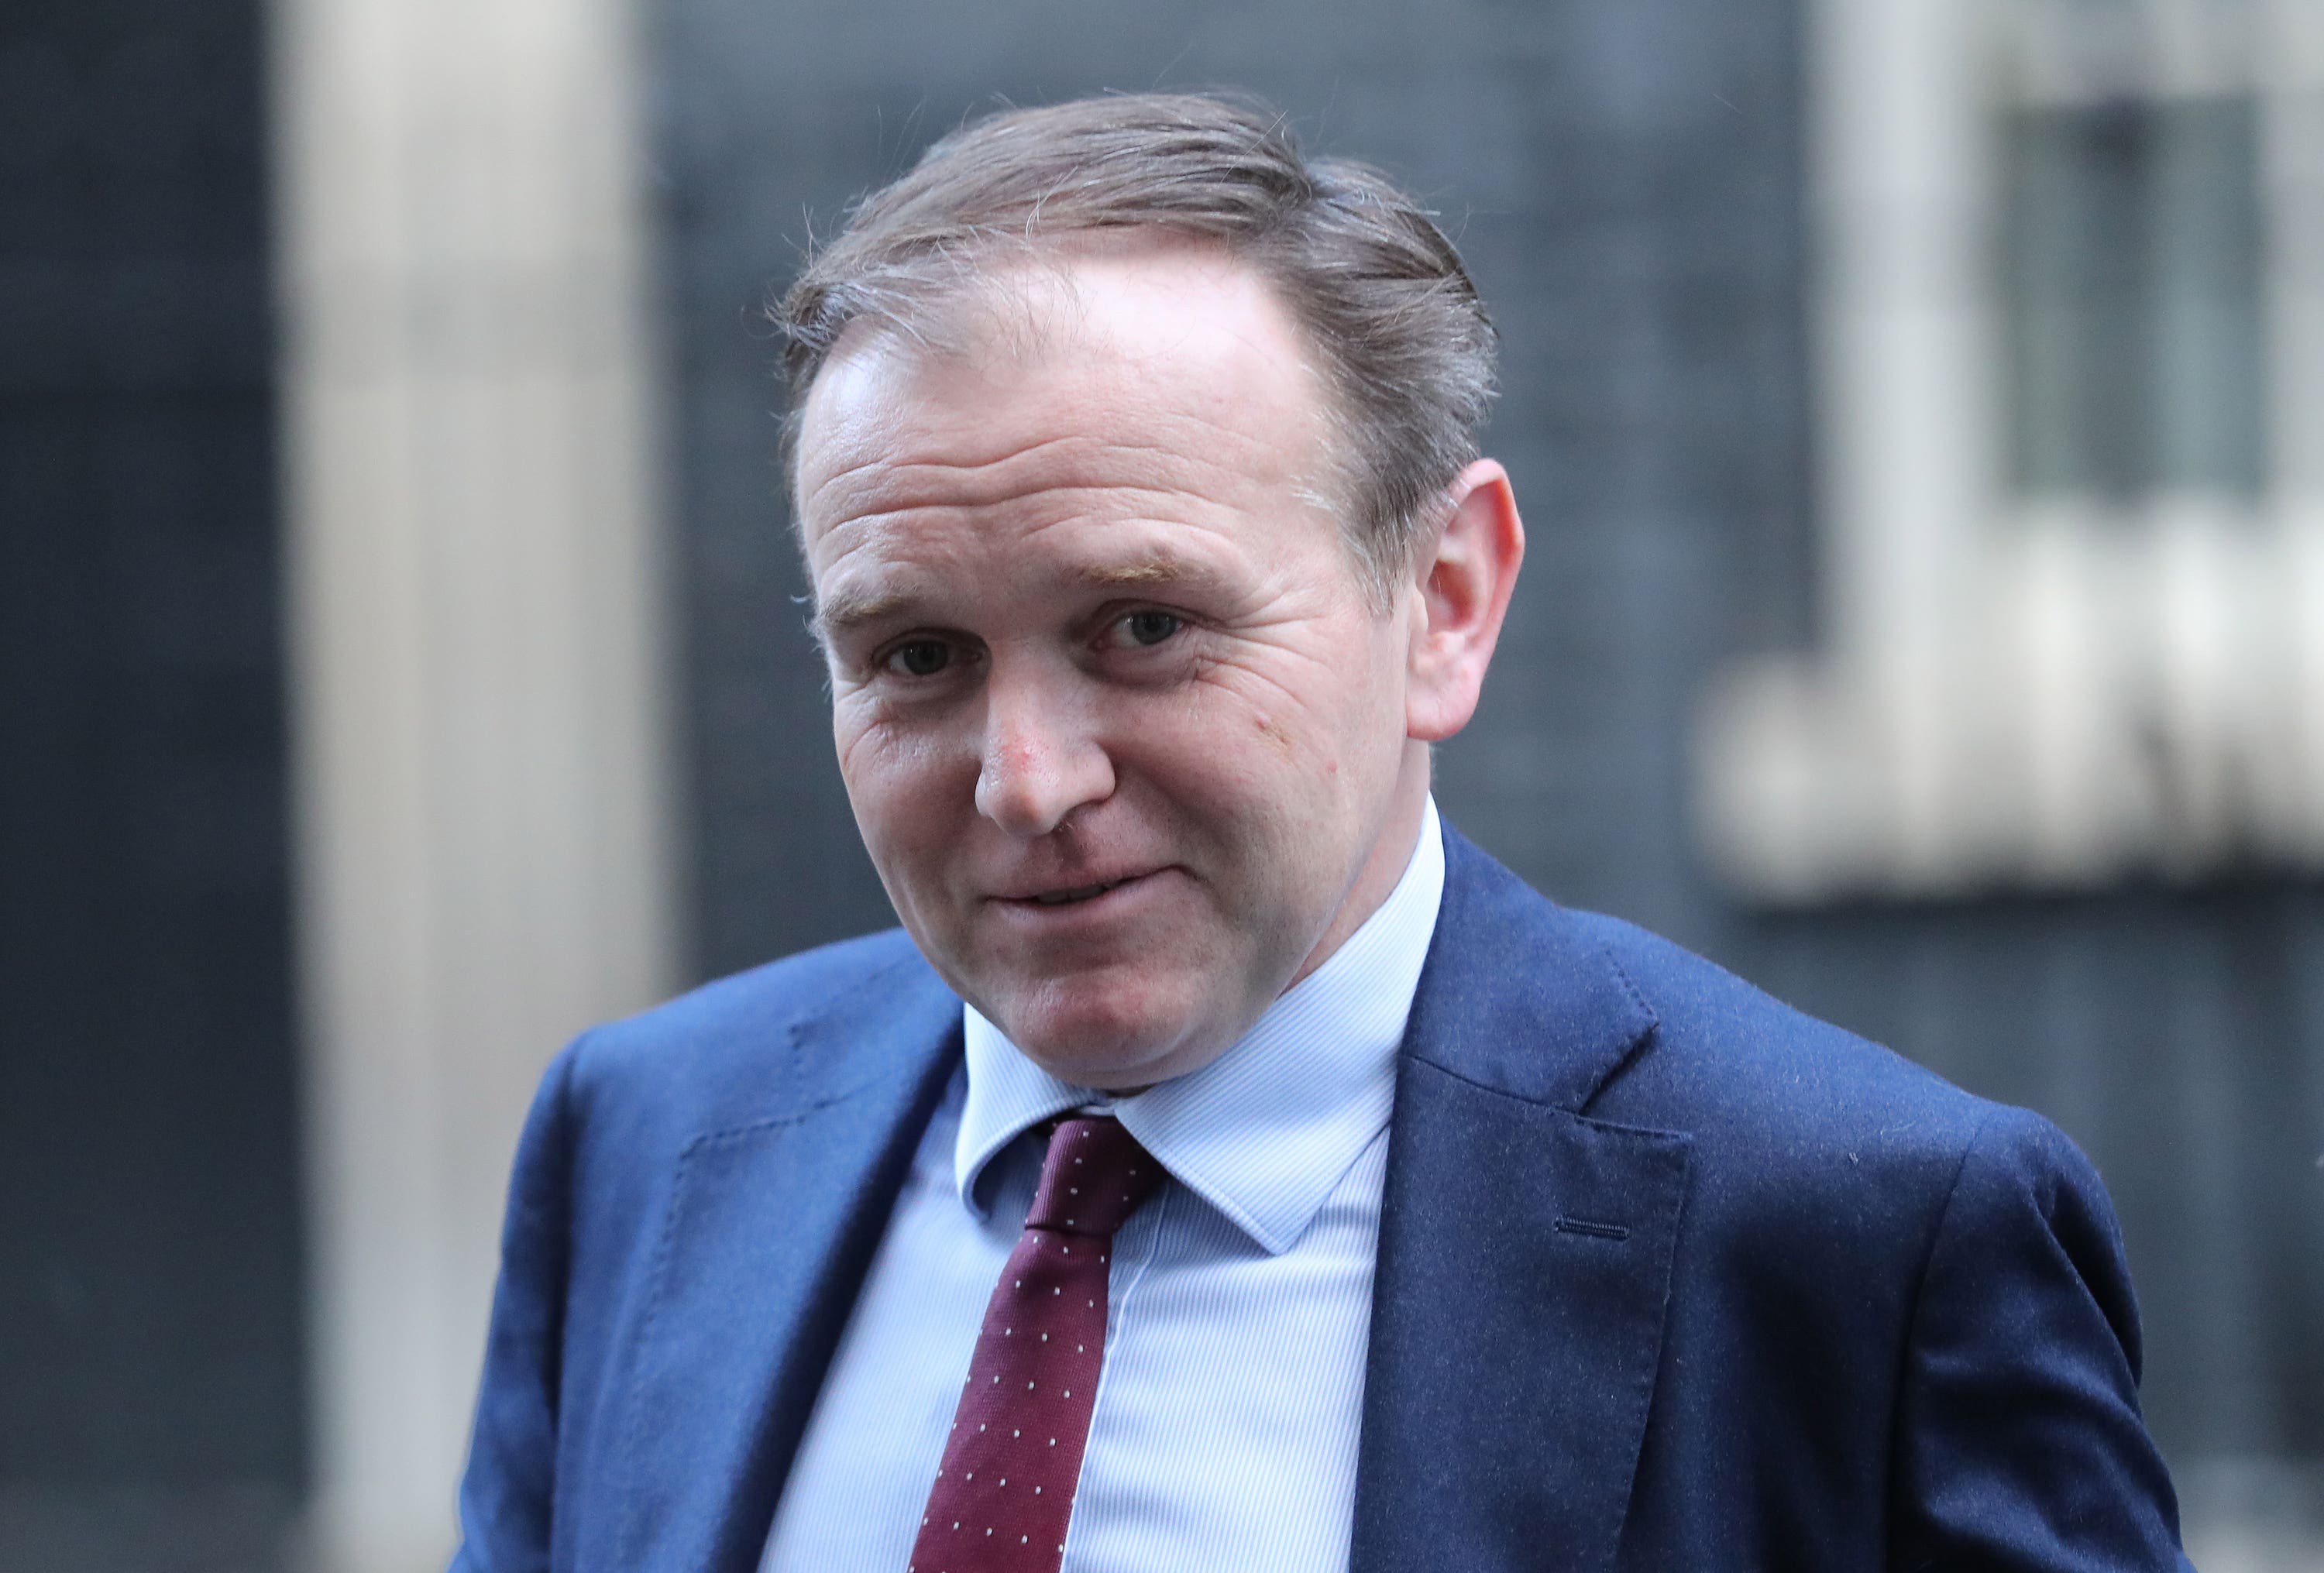 <em>Environment Secretary George Eustice said a £23 million fund had been established to help exporters who were struggling with the paperwork (Aaron Chown/PA)</em>.” /><cite class=